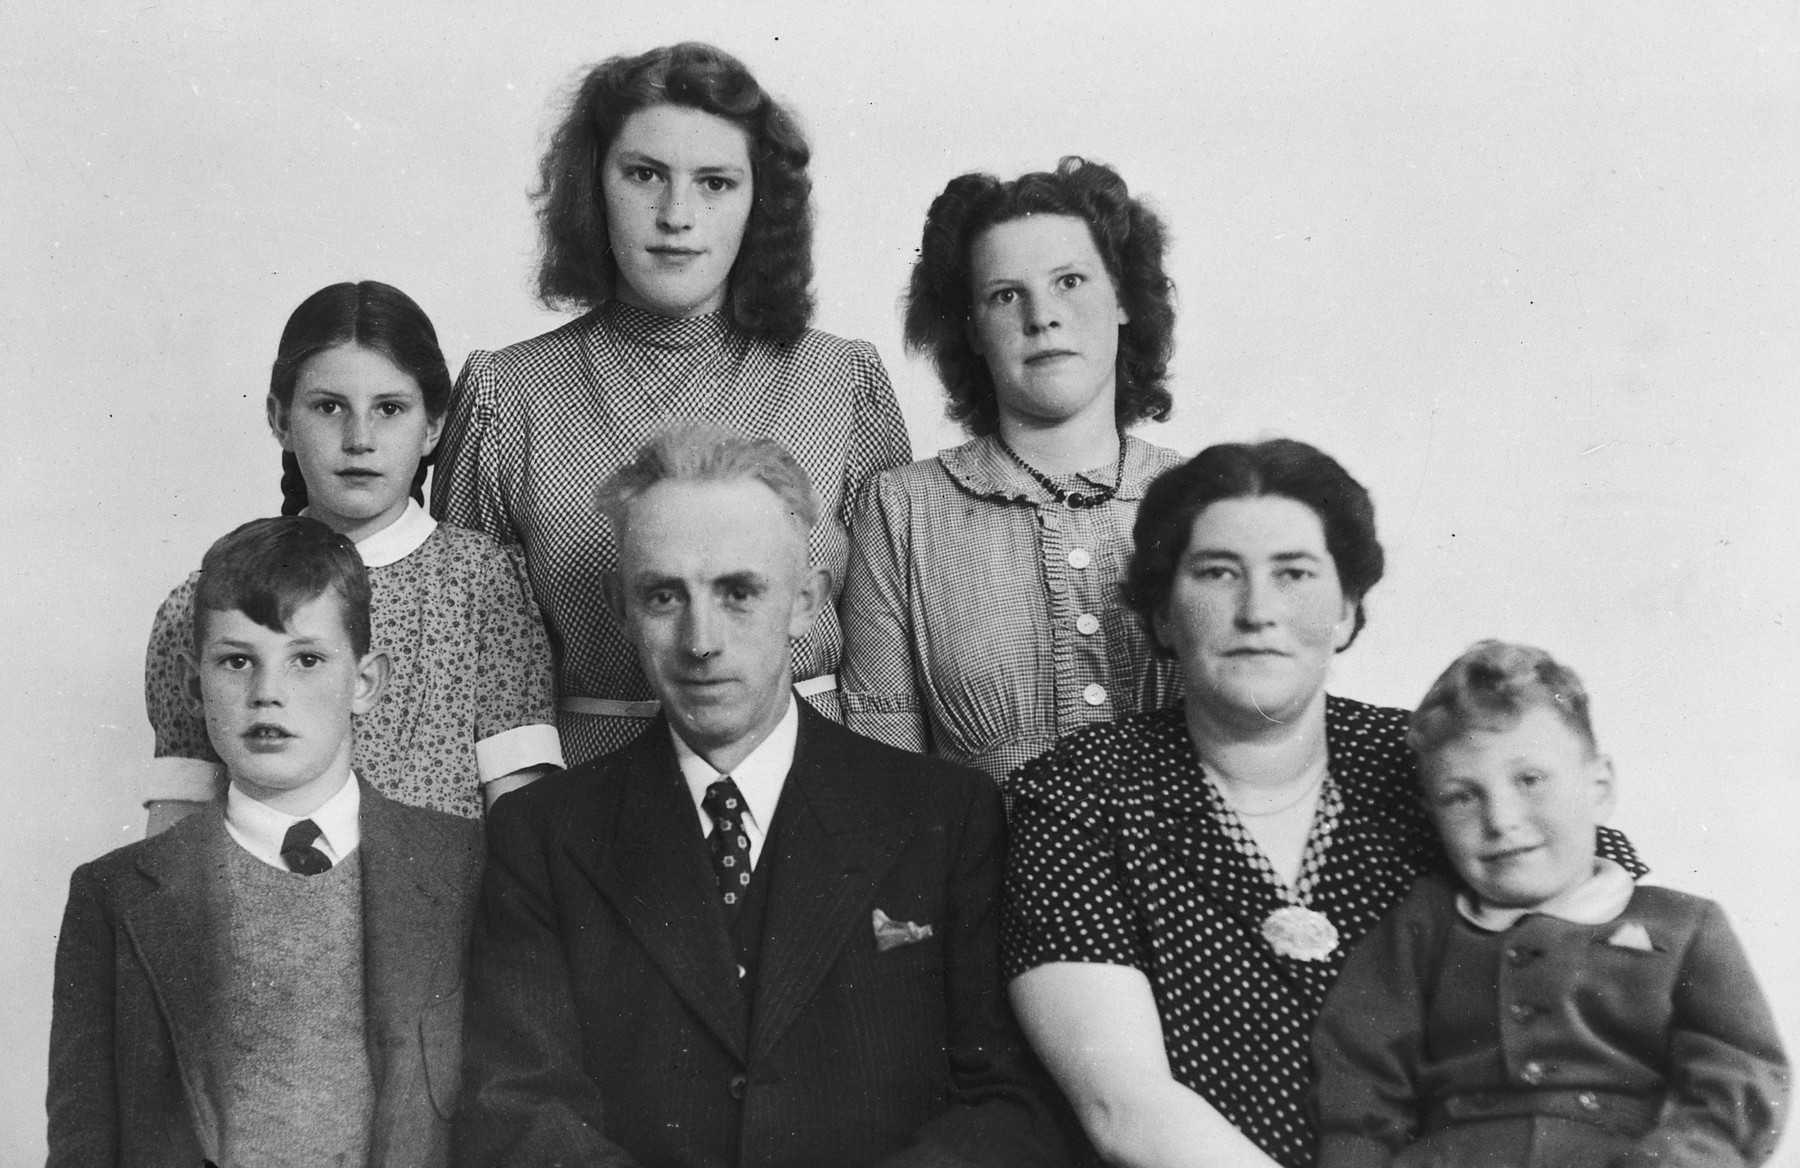 Studio portrait of a family of Dutch rescuers and the Jewish child they were hiding.

Pictured are the family of Berend Philip Bakker and Jeltje Bakker-Woudsma.  The Jewish child, Harry Leo Davids is sitting in the front row on the far right.  Sytske Bakker is standing behind her mother on the right.